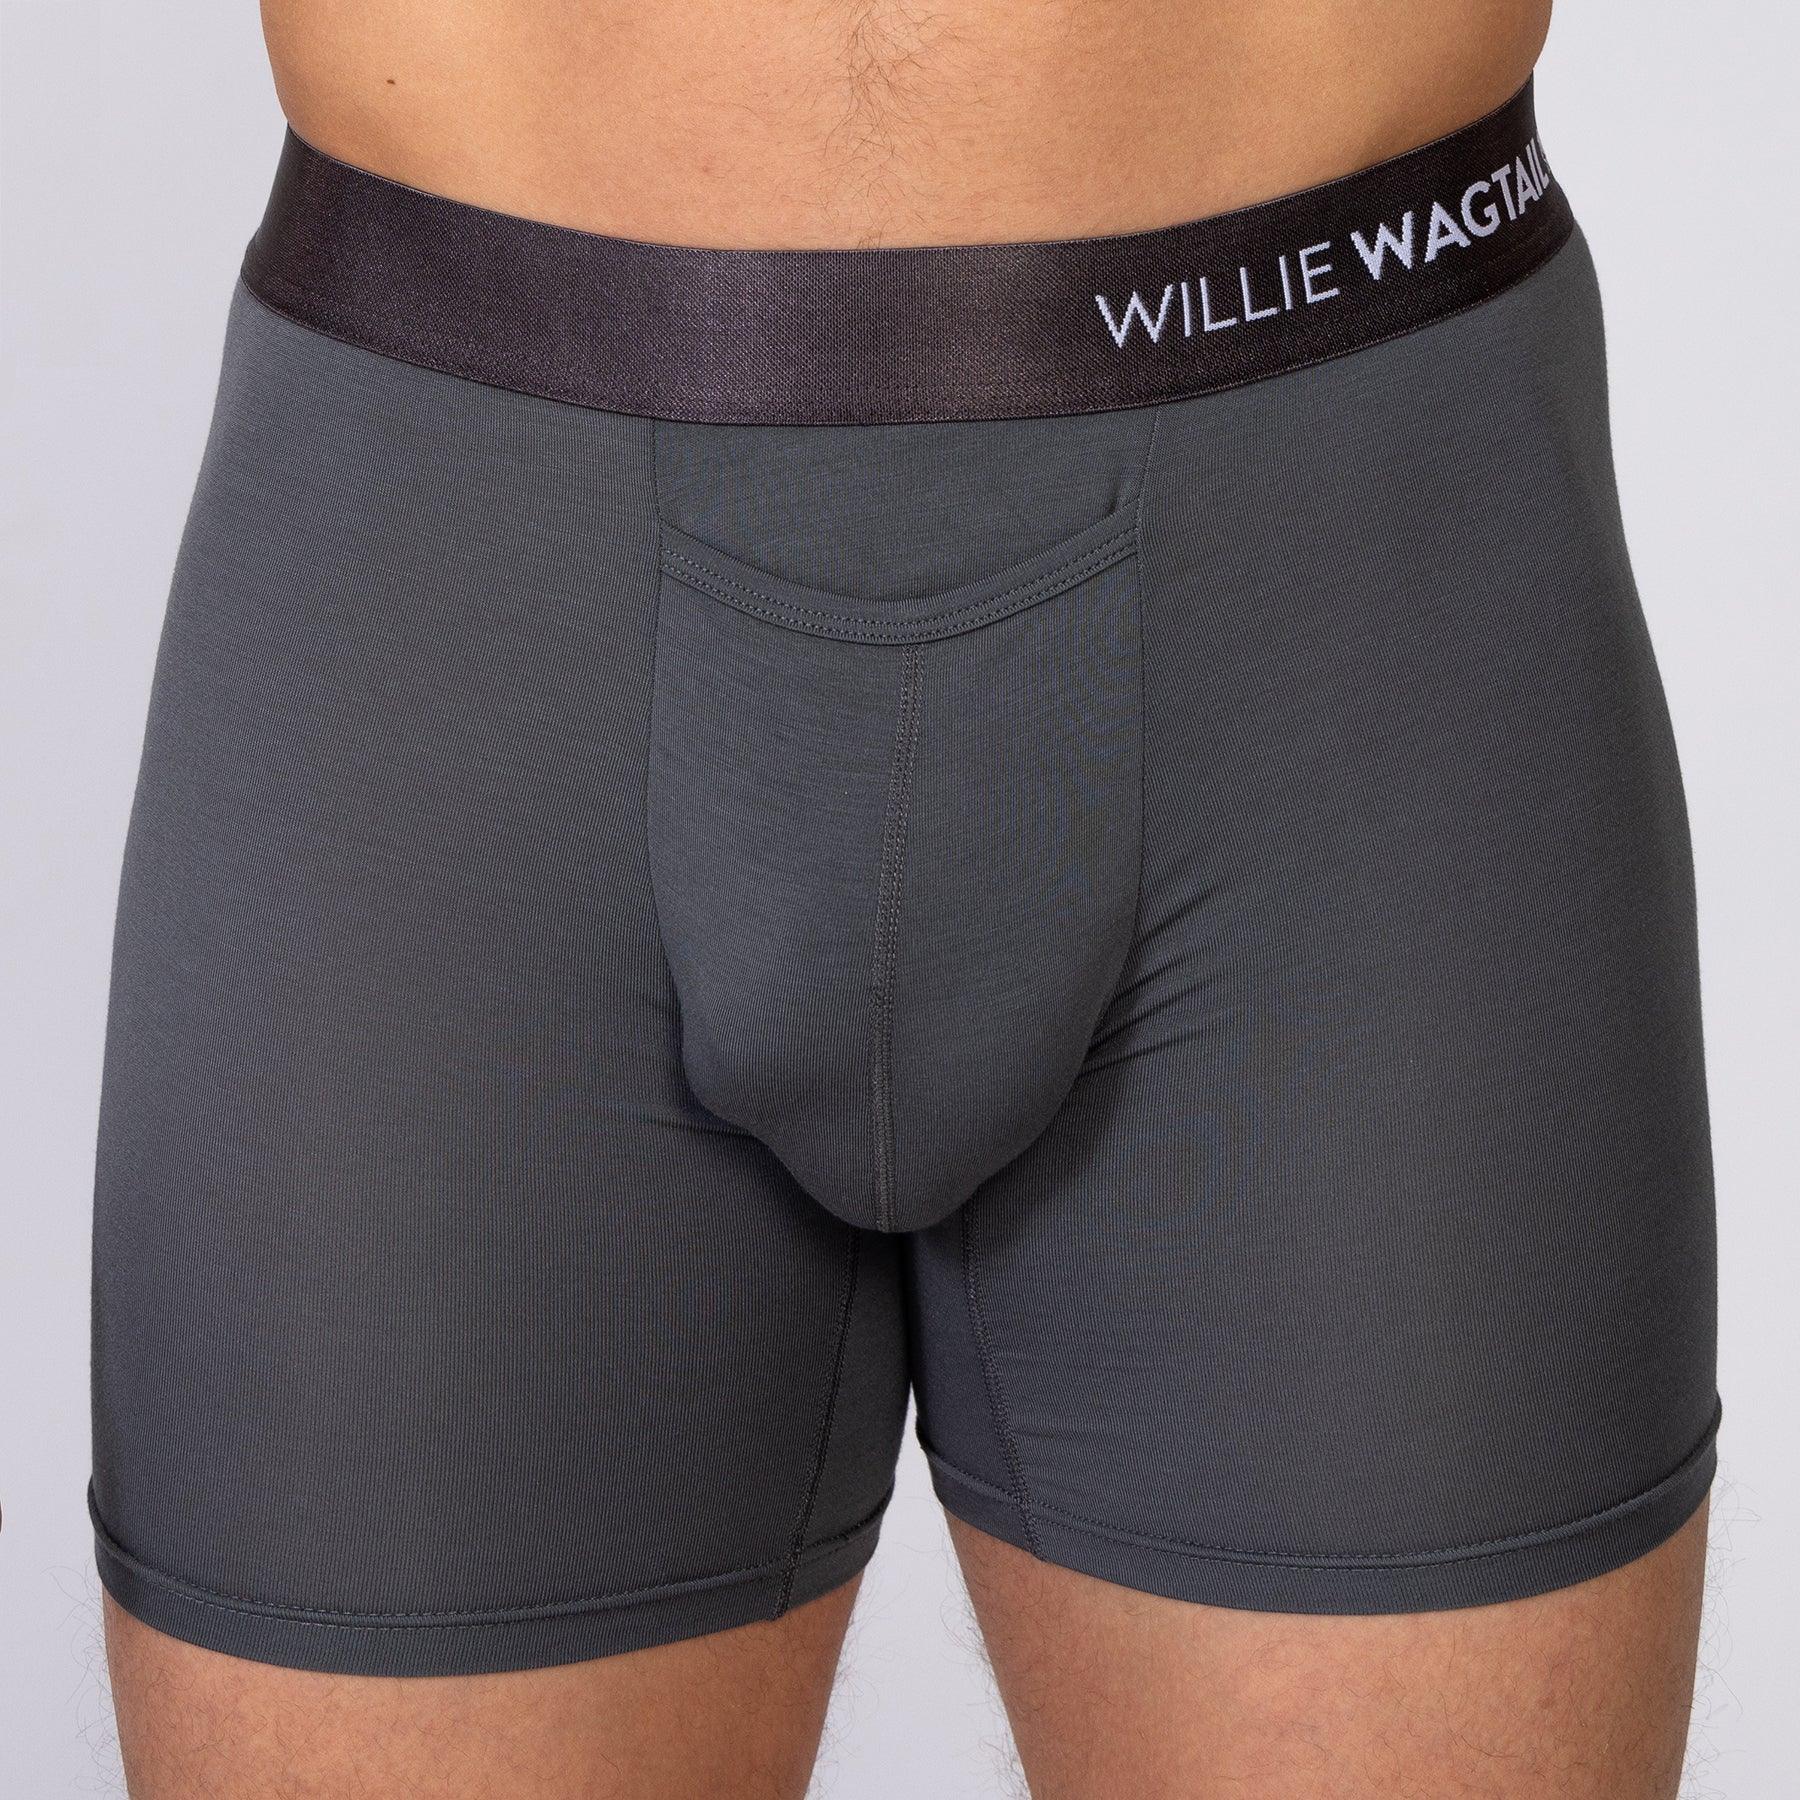 Grey Slate - Boxer Briefs - Willie Wagtail